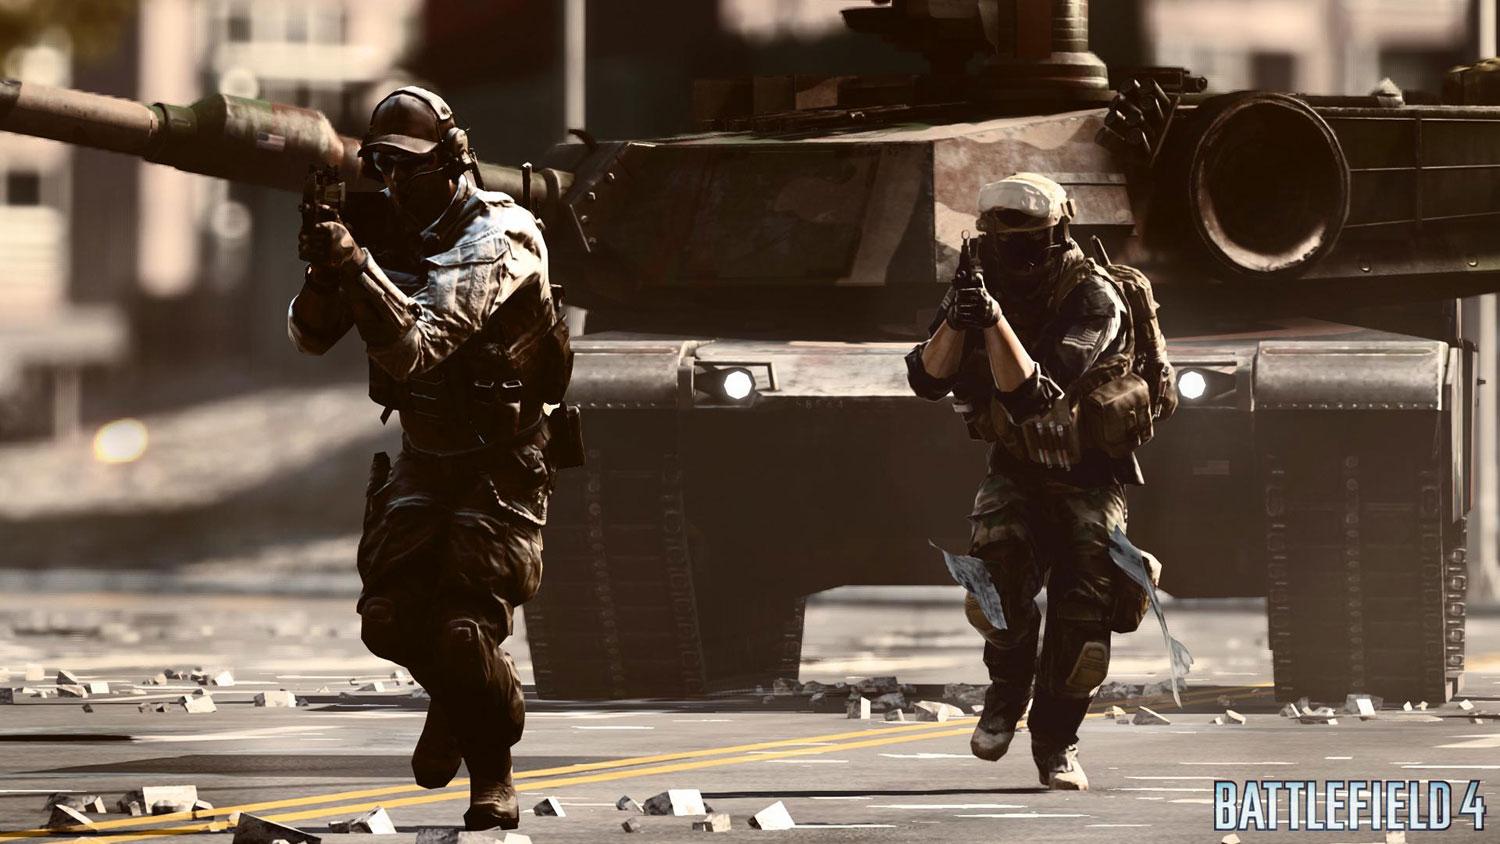 Battlefield 4 to (re)introduce platoons